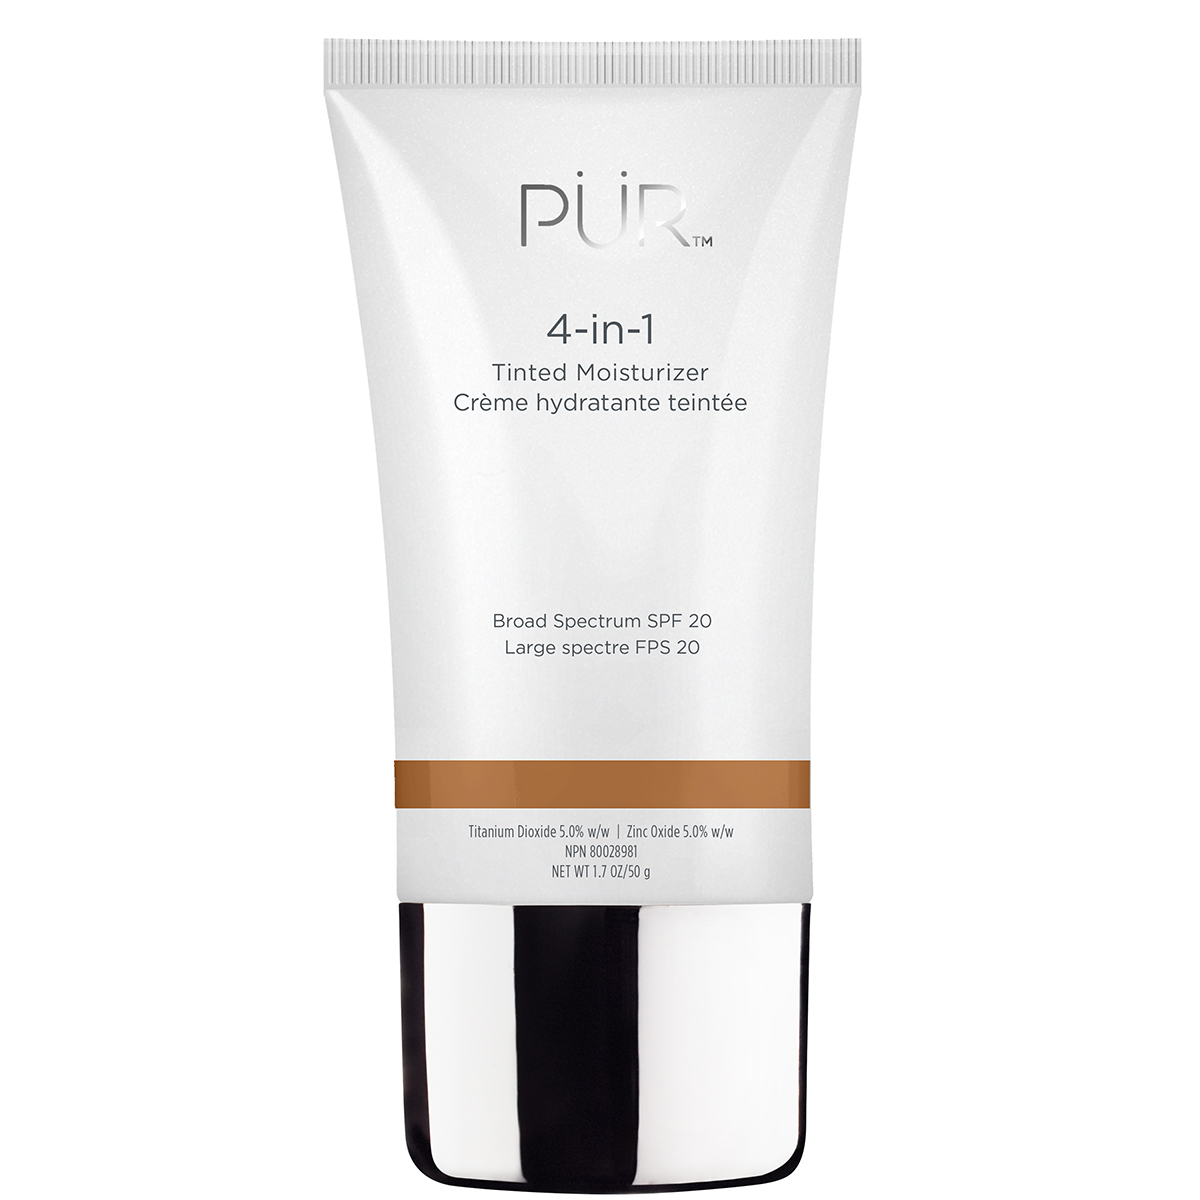 Pur 4-in-1 Mineral Tinted Moisturizer TG7